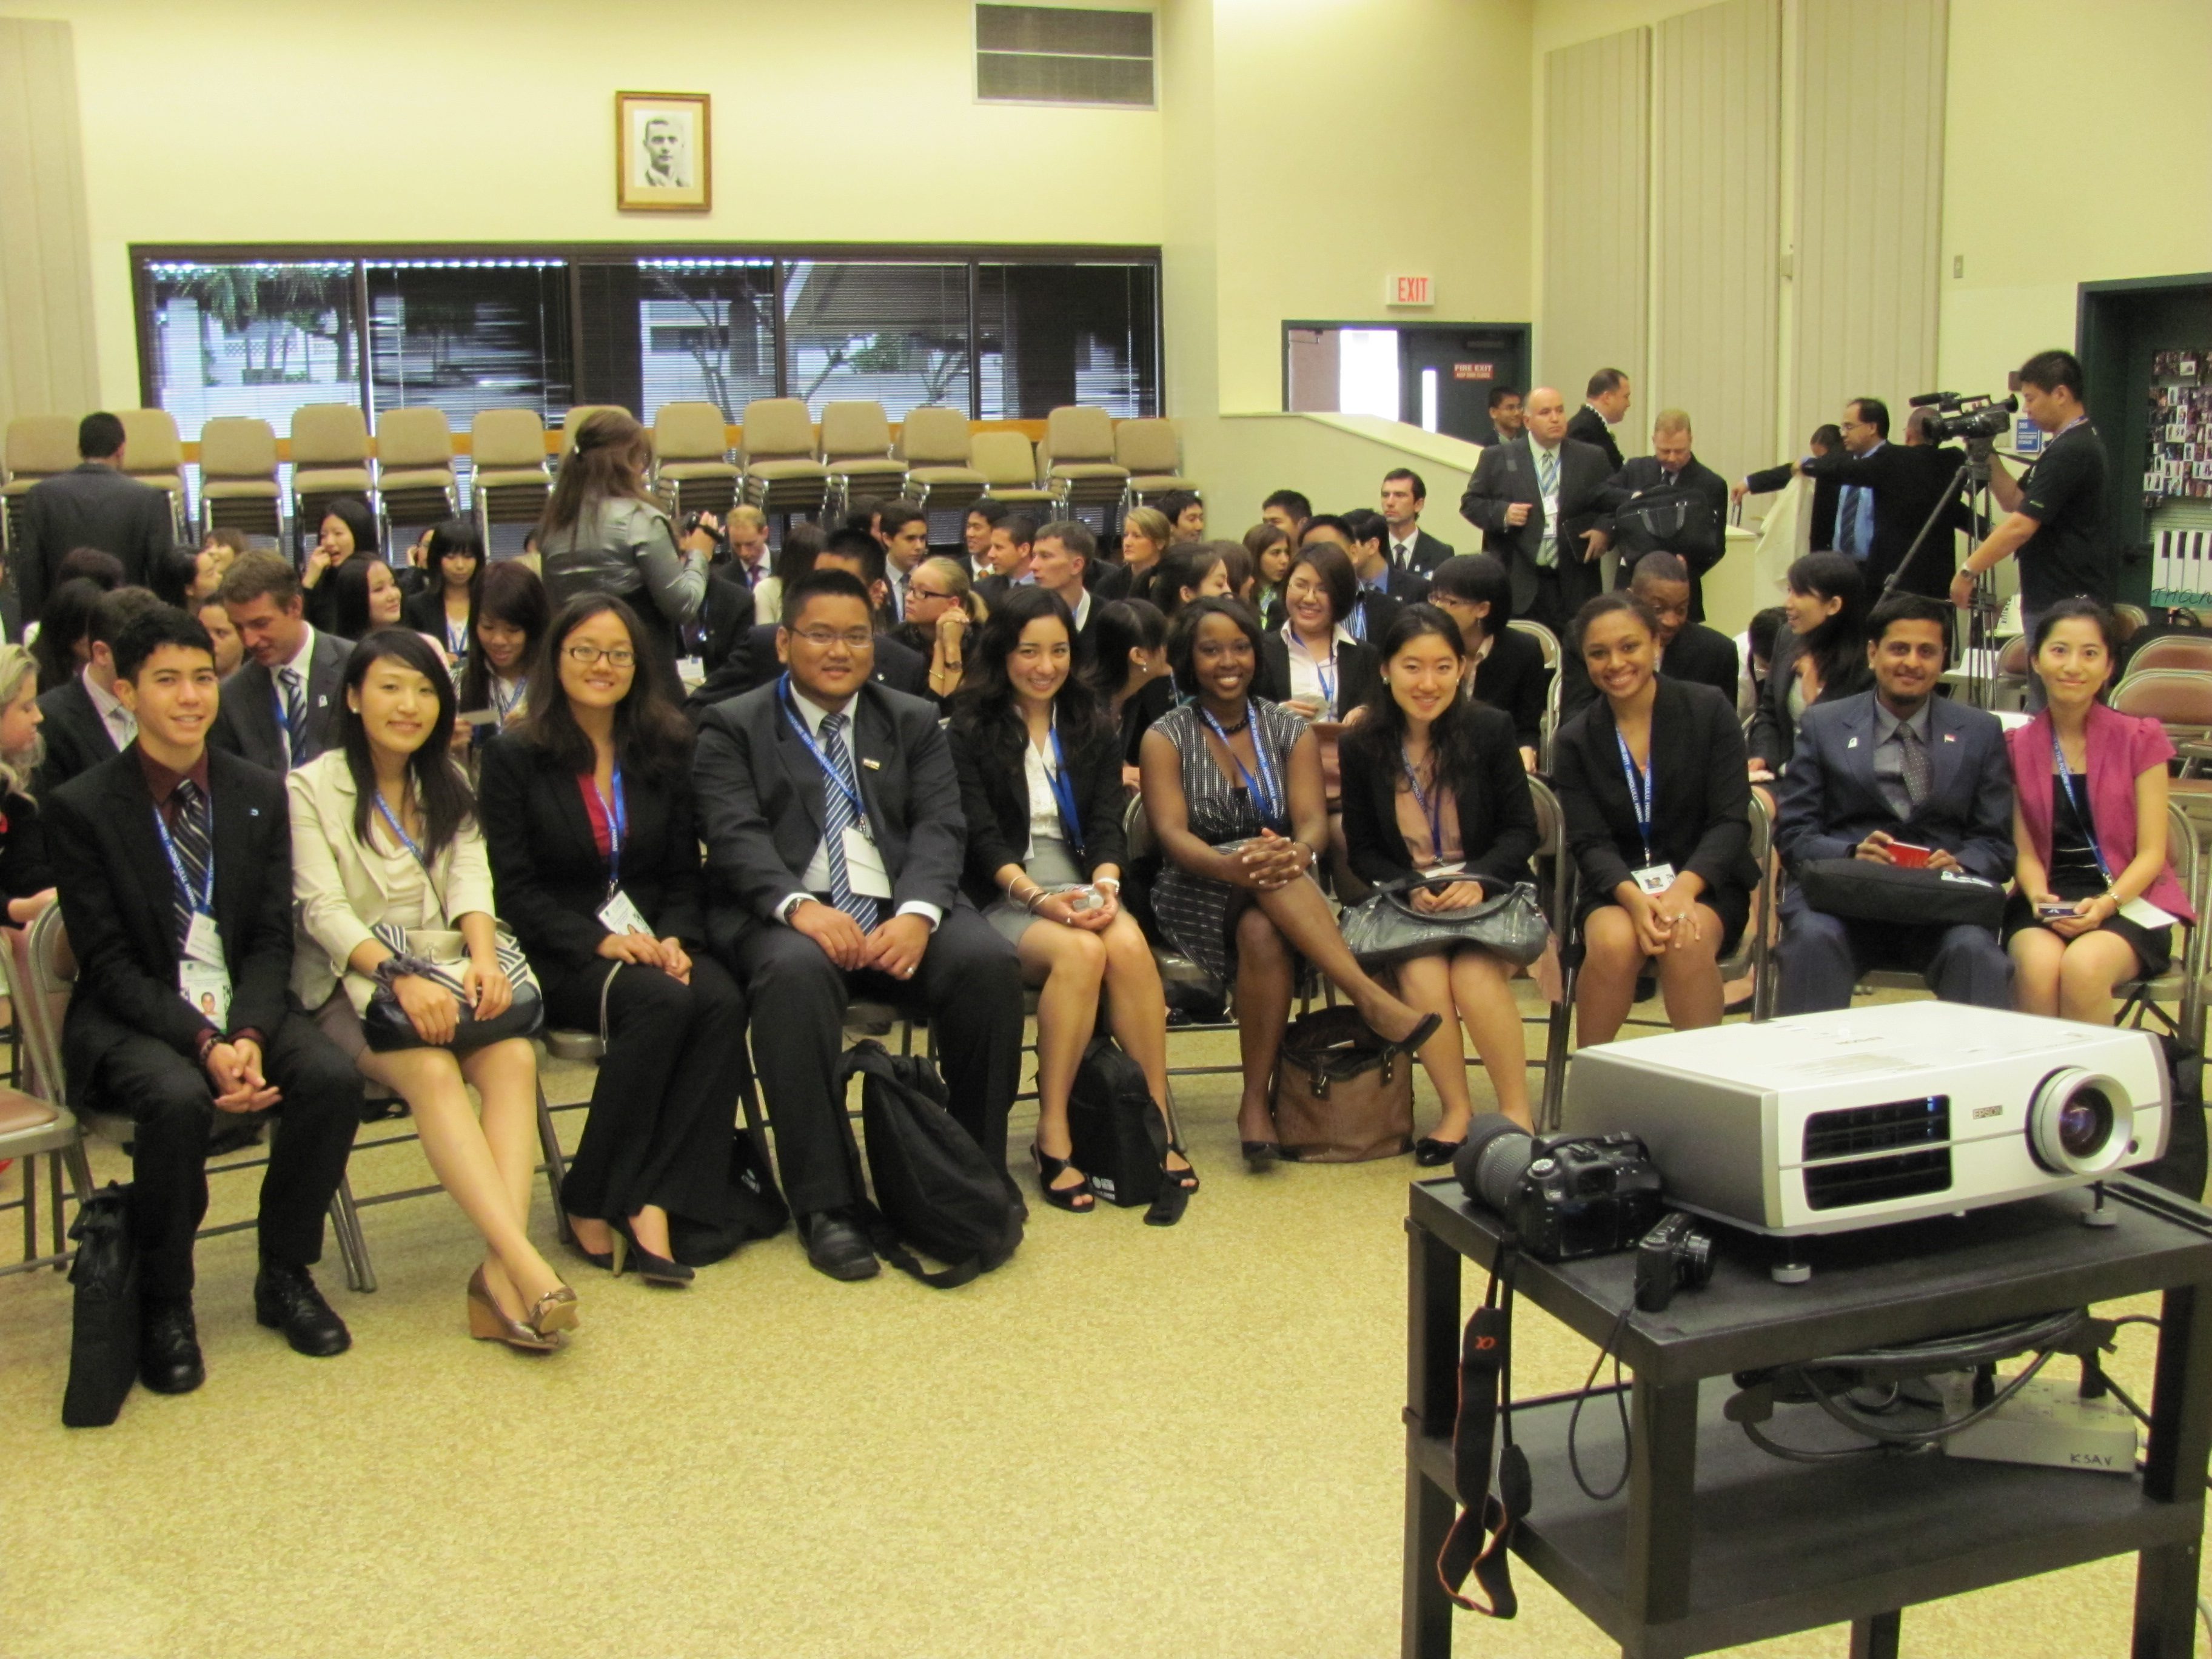 First session of Voices at Kamehameha Schools